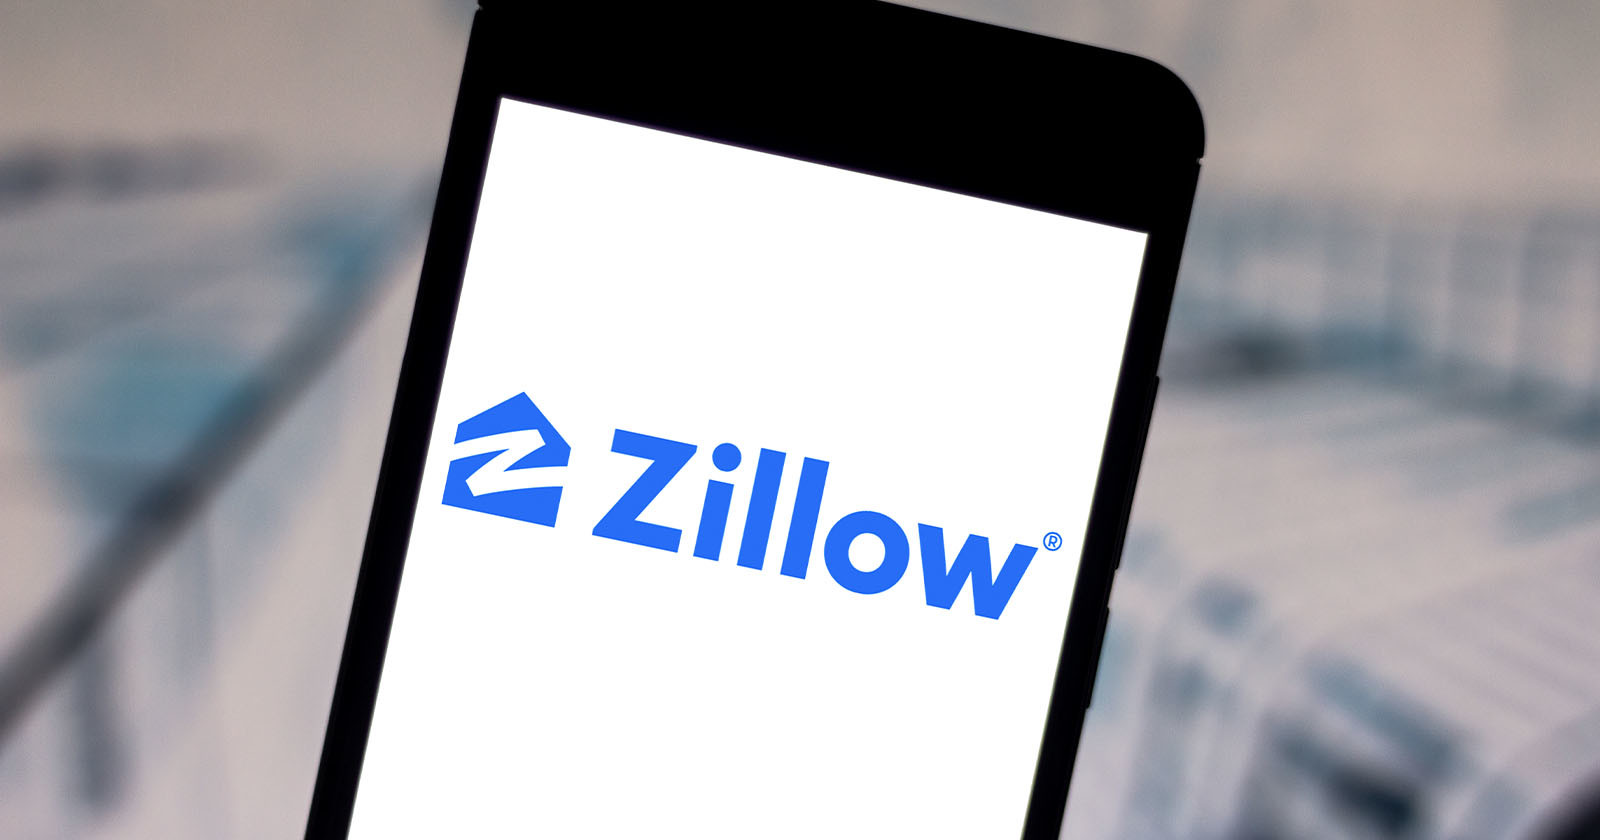  zillow only wants fined once 700 photo 